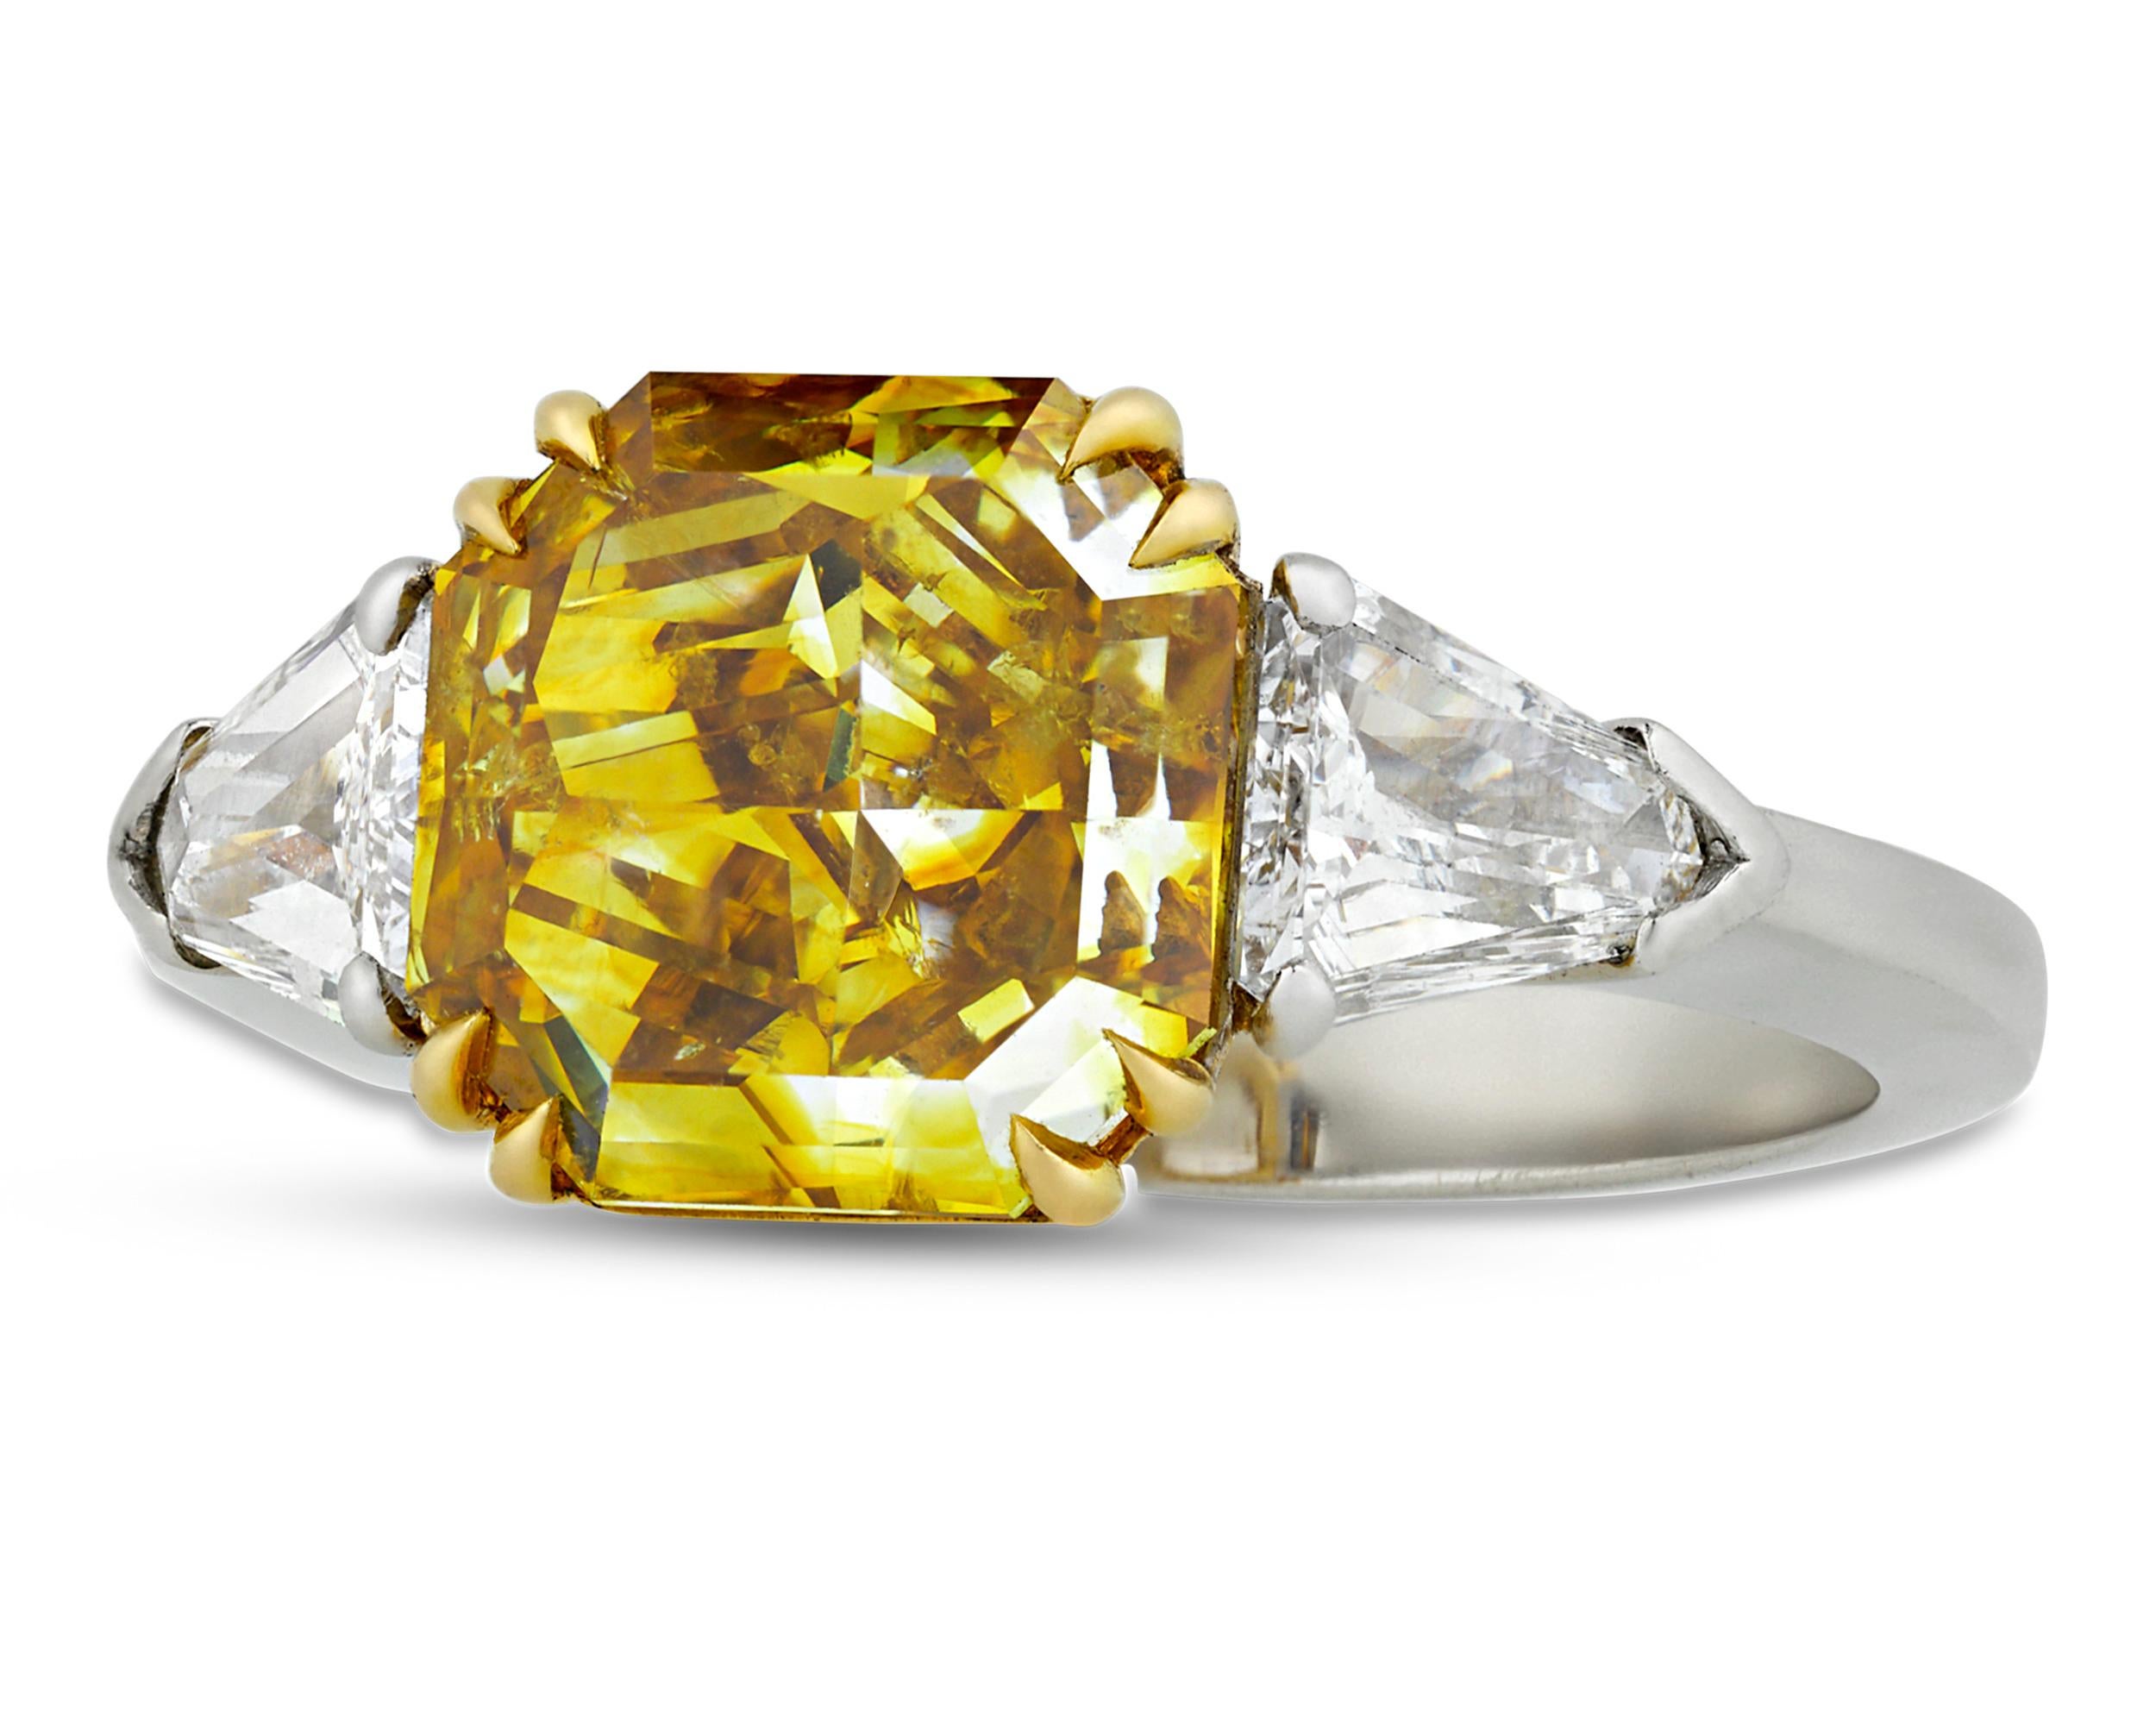 A rare 4.01-carat fancy deep yellow diamond displays a remarkable depth of color and brilliance in this extraordinary ring. Prized for both their beauty and rarity, yellow diamonds of this quality are among the most desirable and radiant of colored